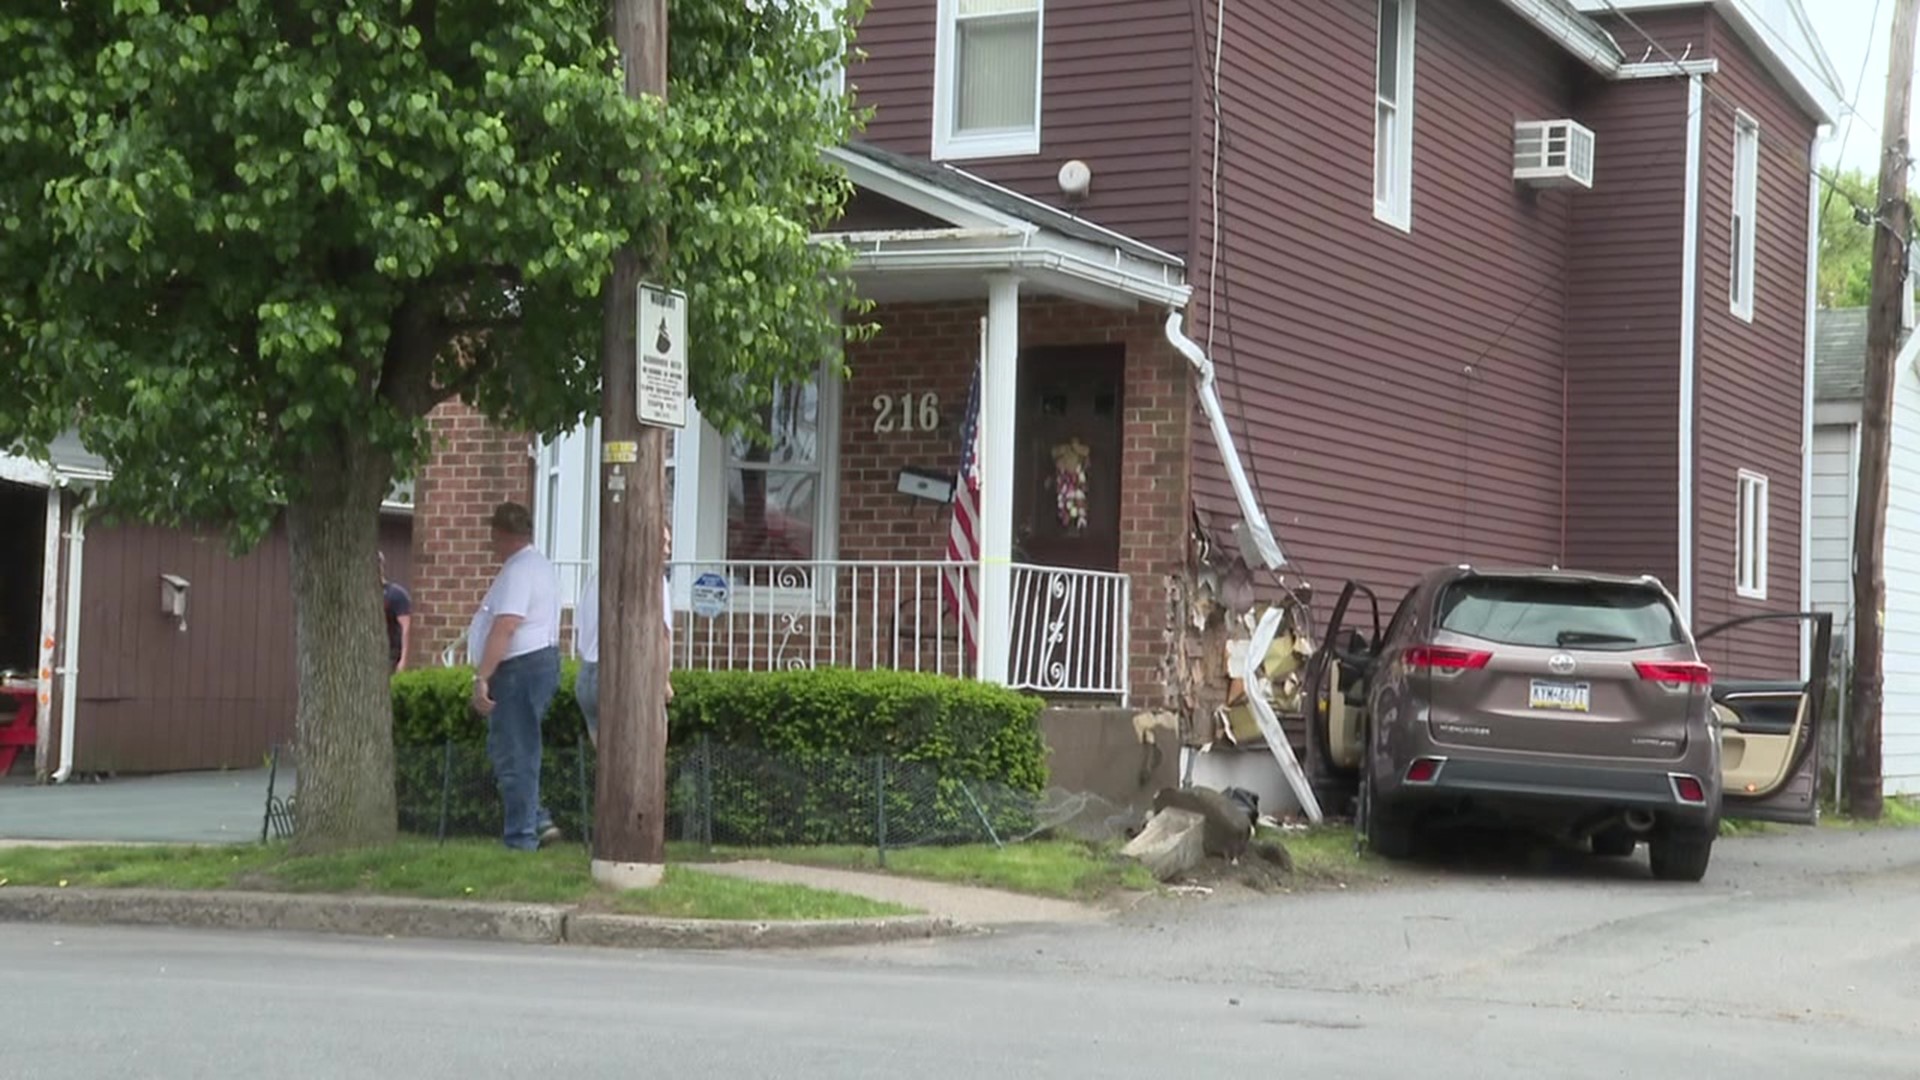 The car also struck the home's gas meter.